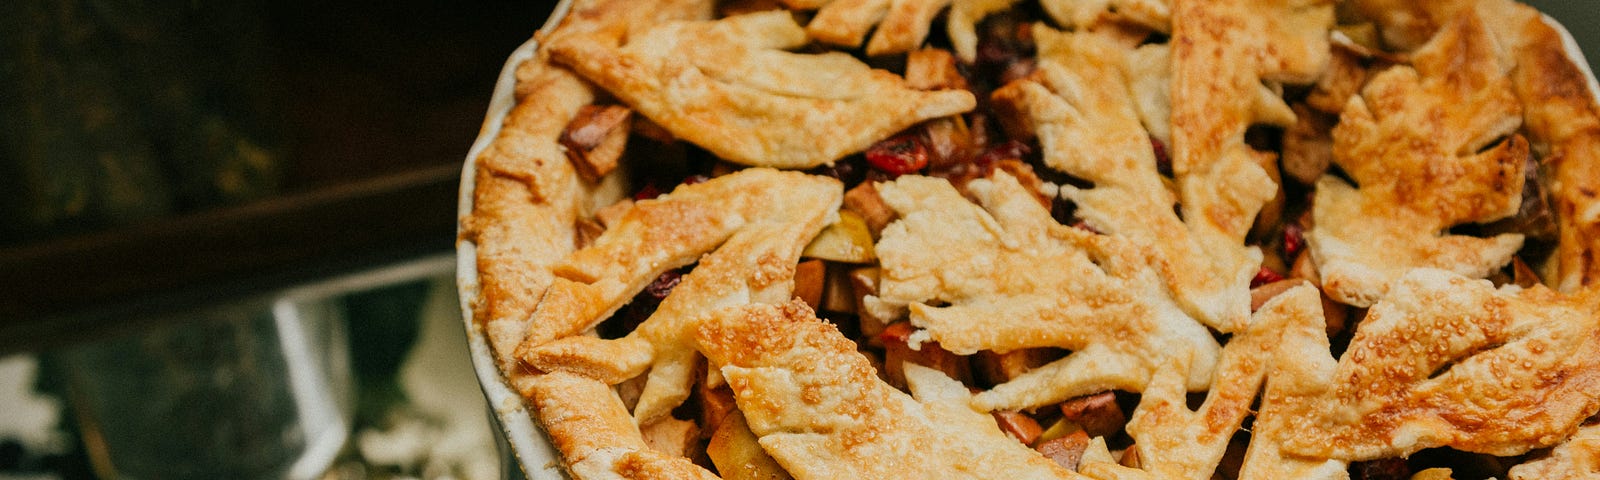 Beautiful apple pie in a china dish, with a top crust decorated with leaves made from pie dough.